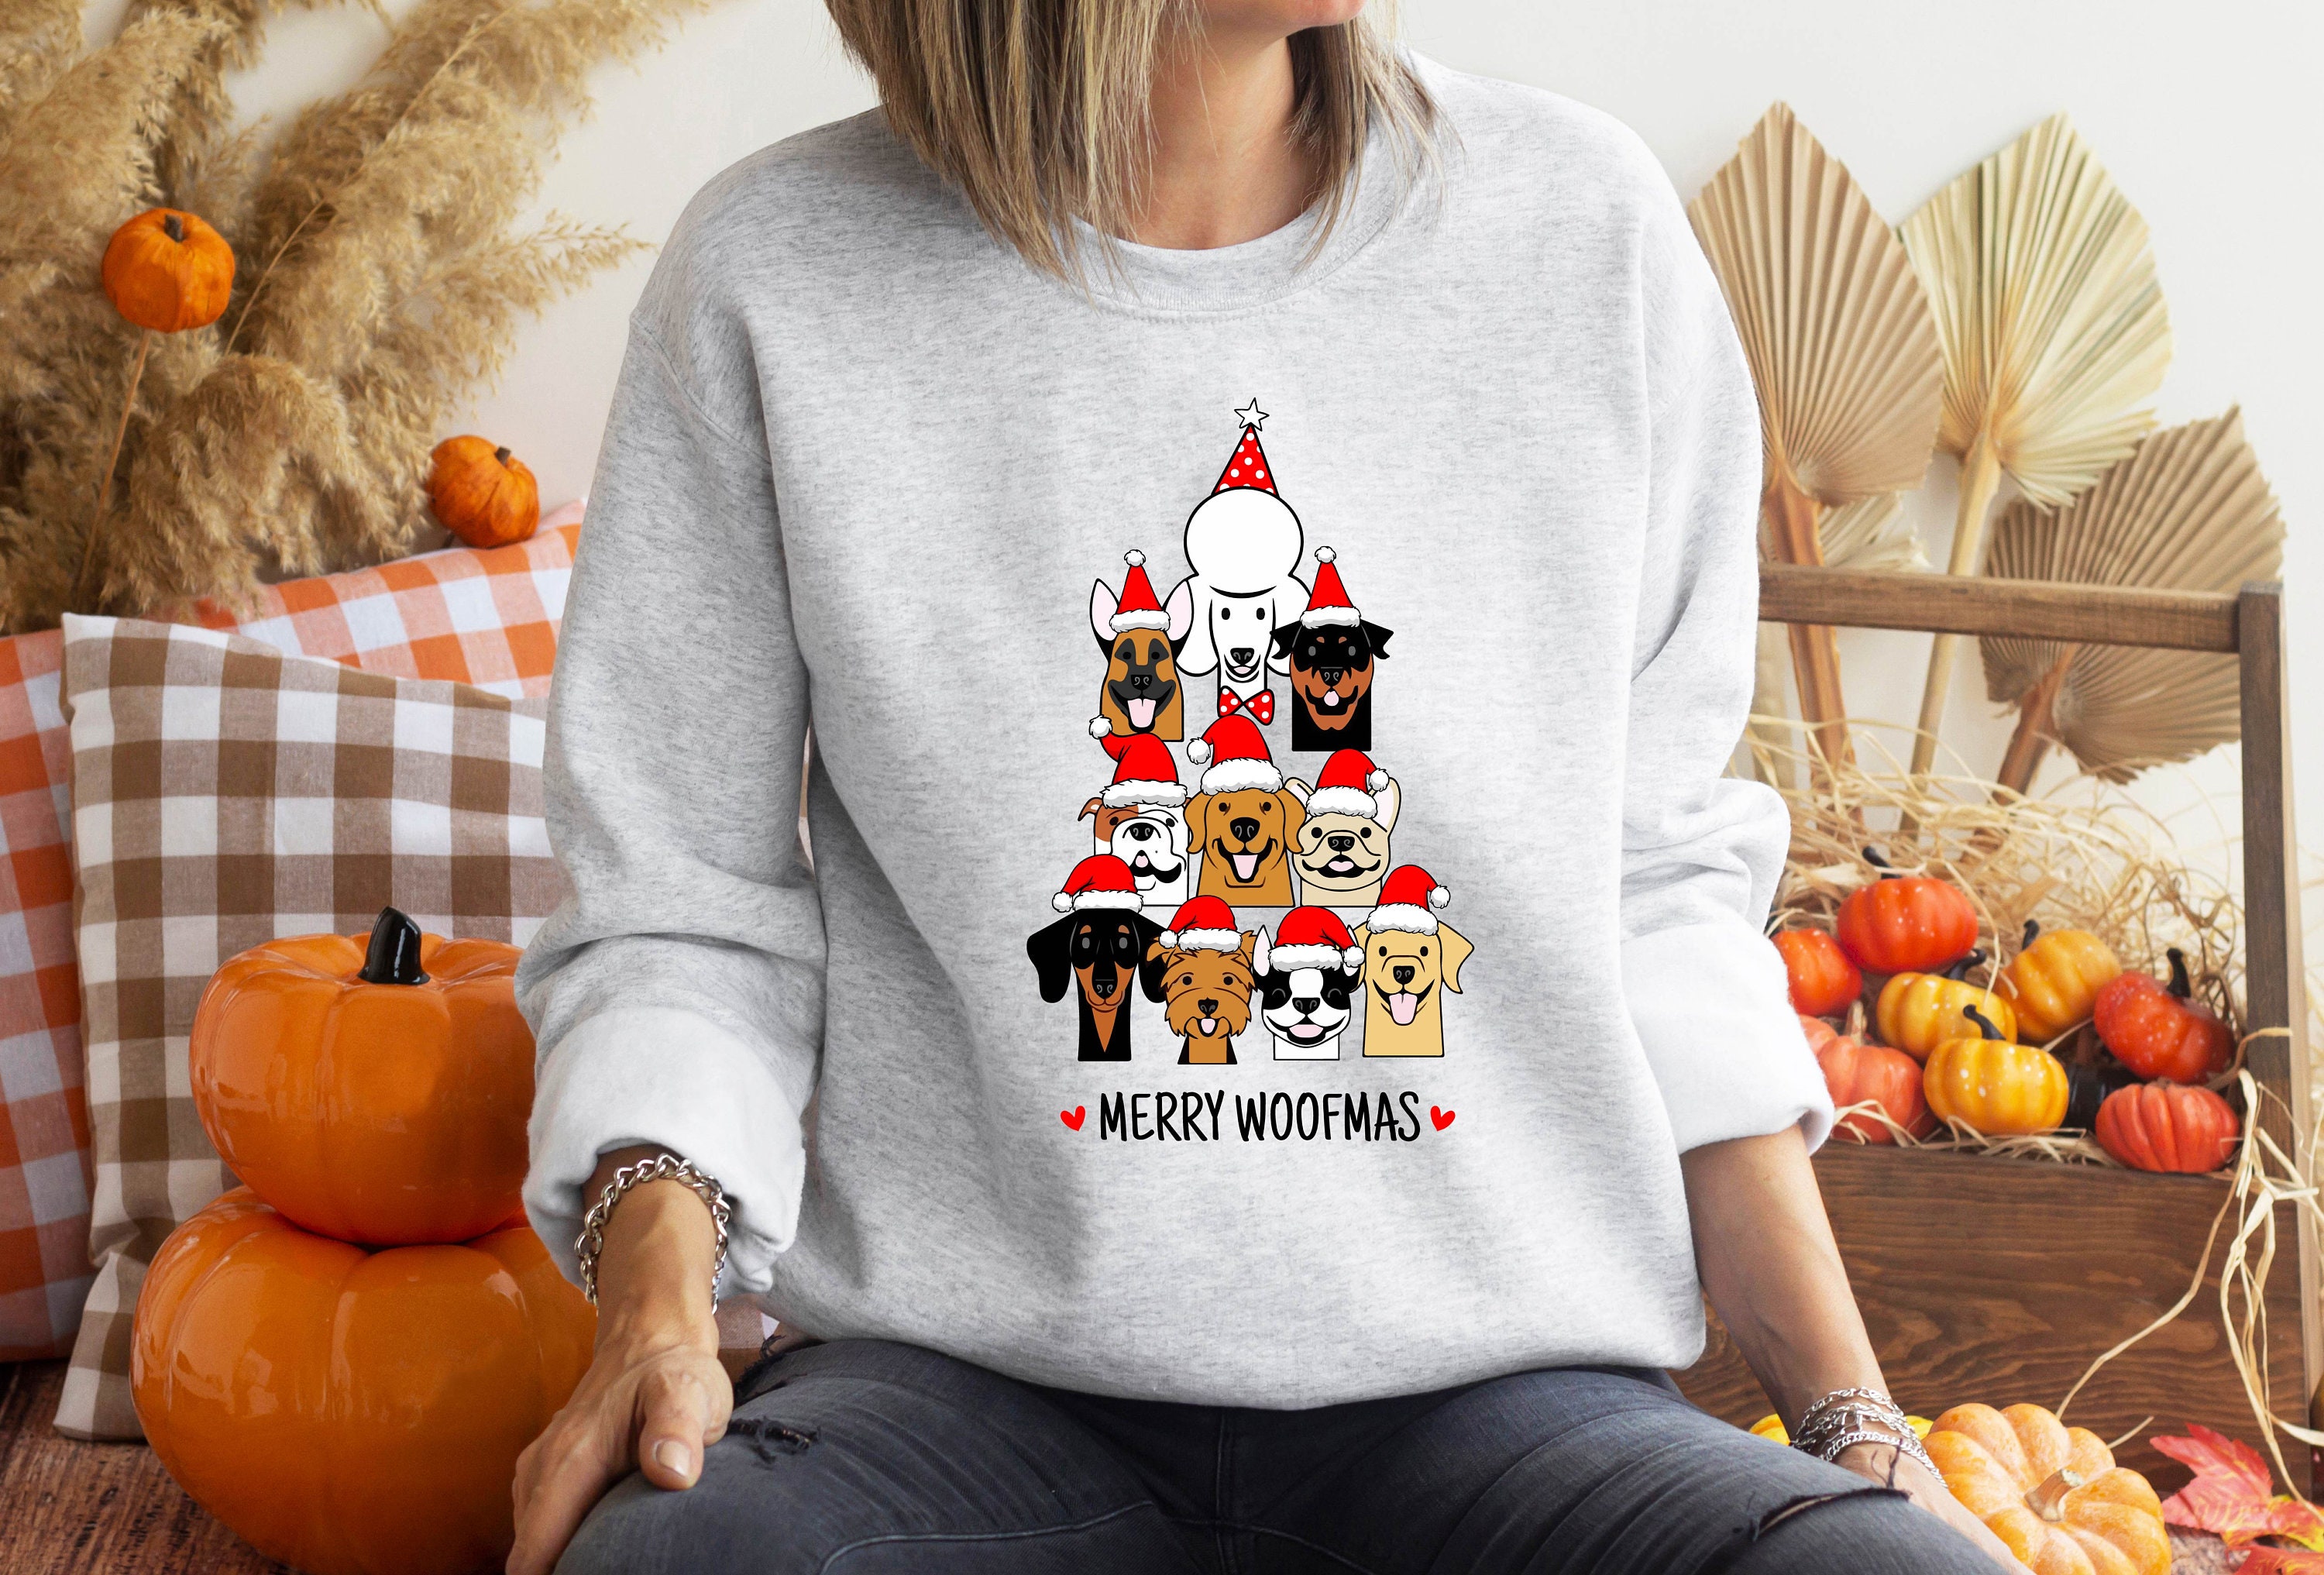 Discover Merry Woofmas Sweatshirt, Christmas Puppy